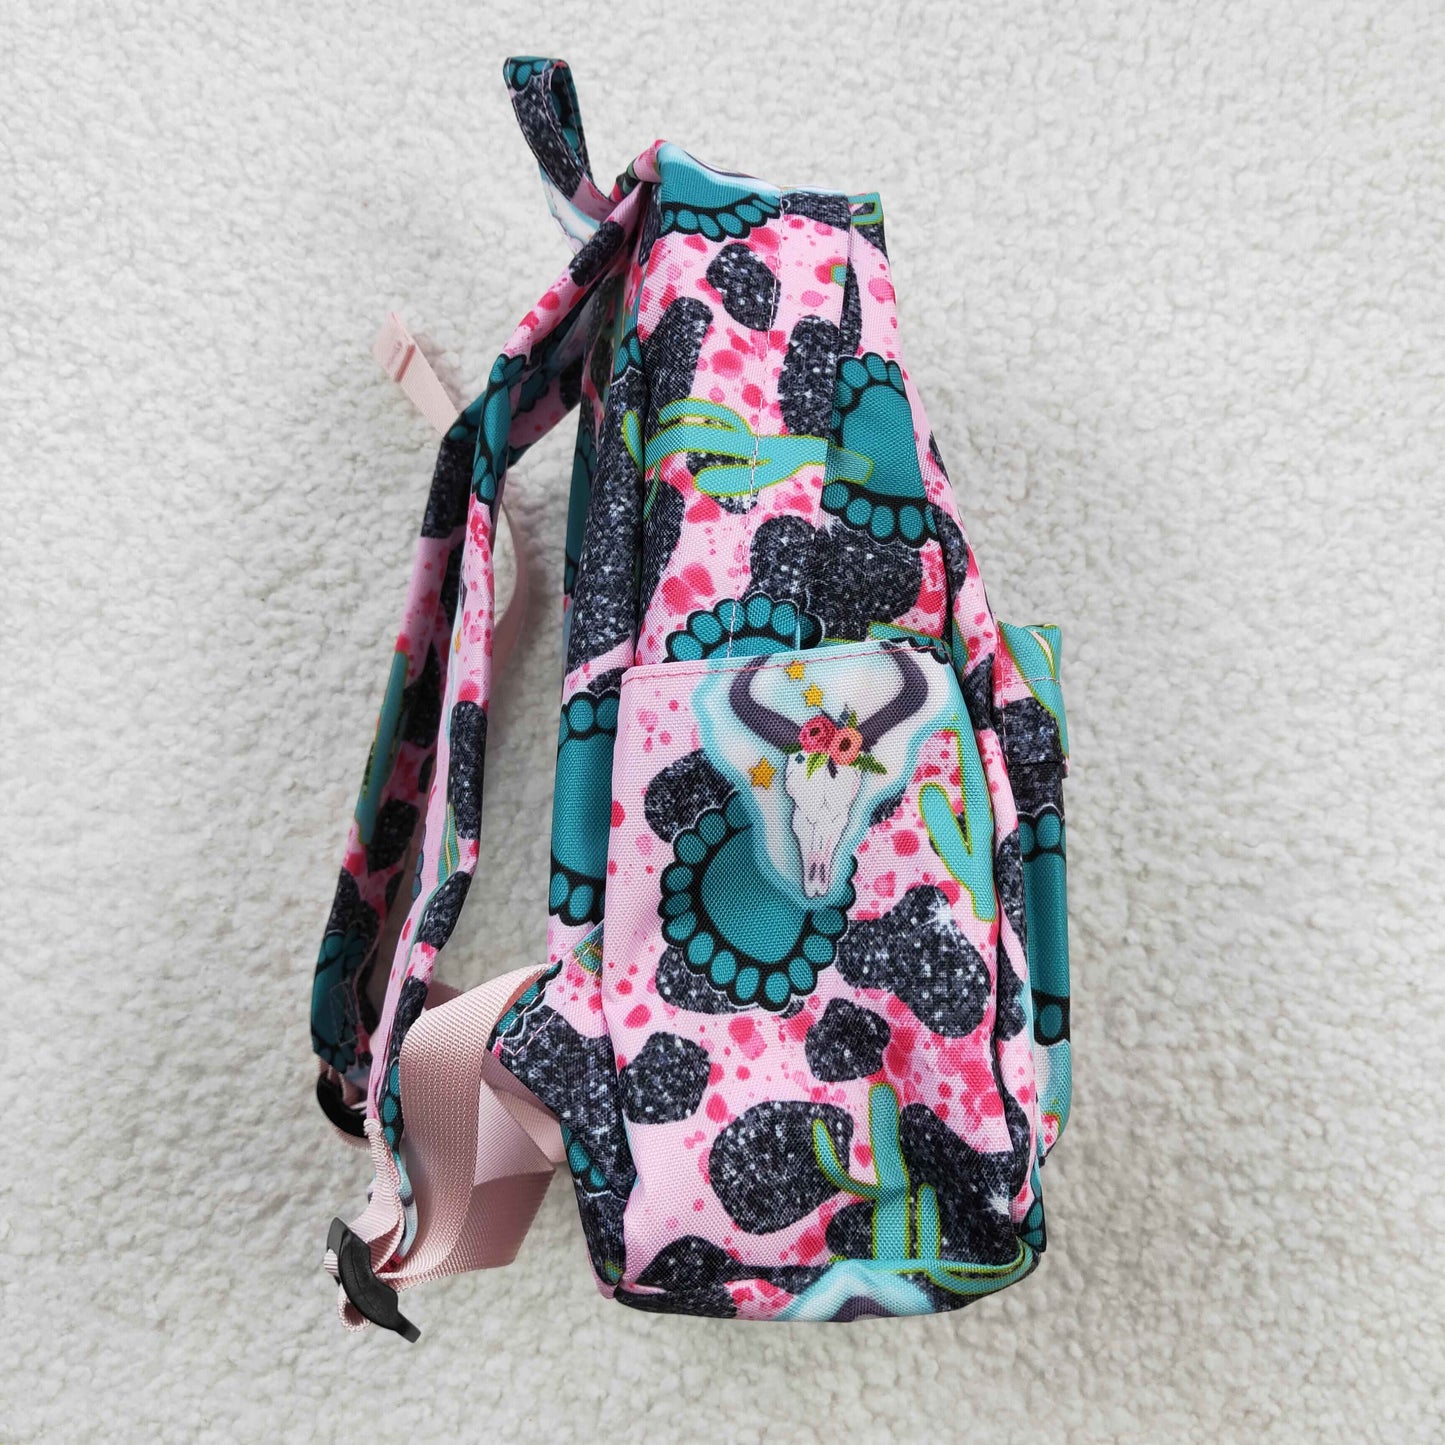 Cactus Cow Print BACKPACK